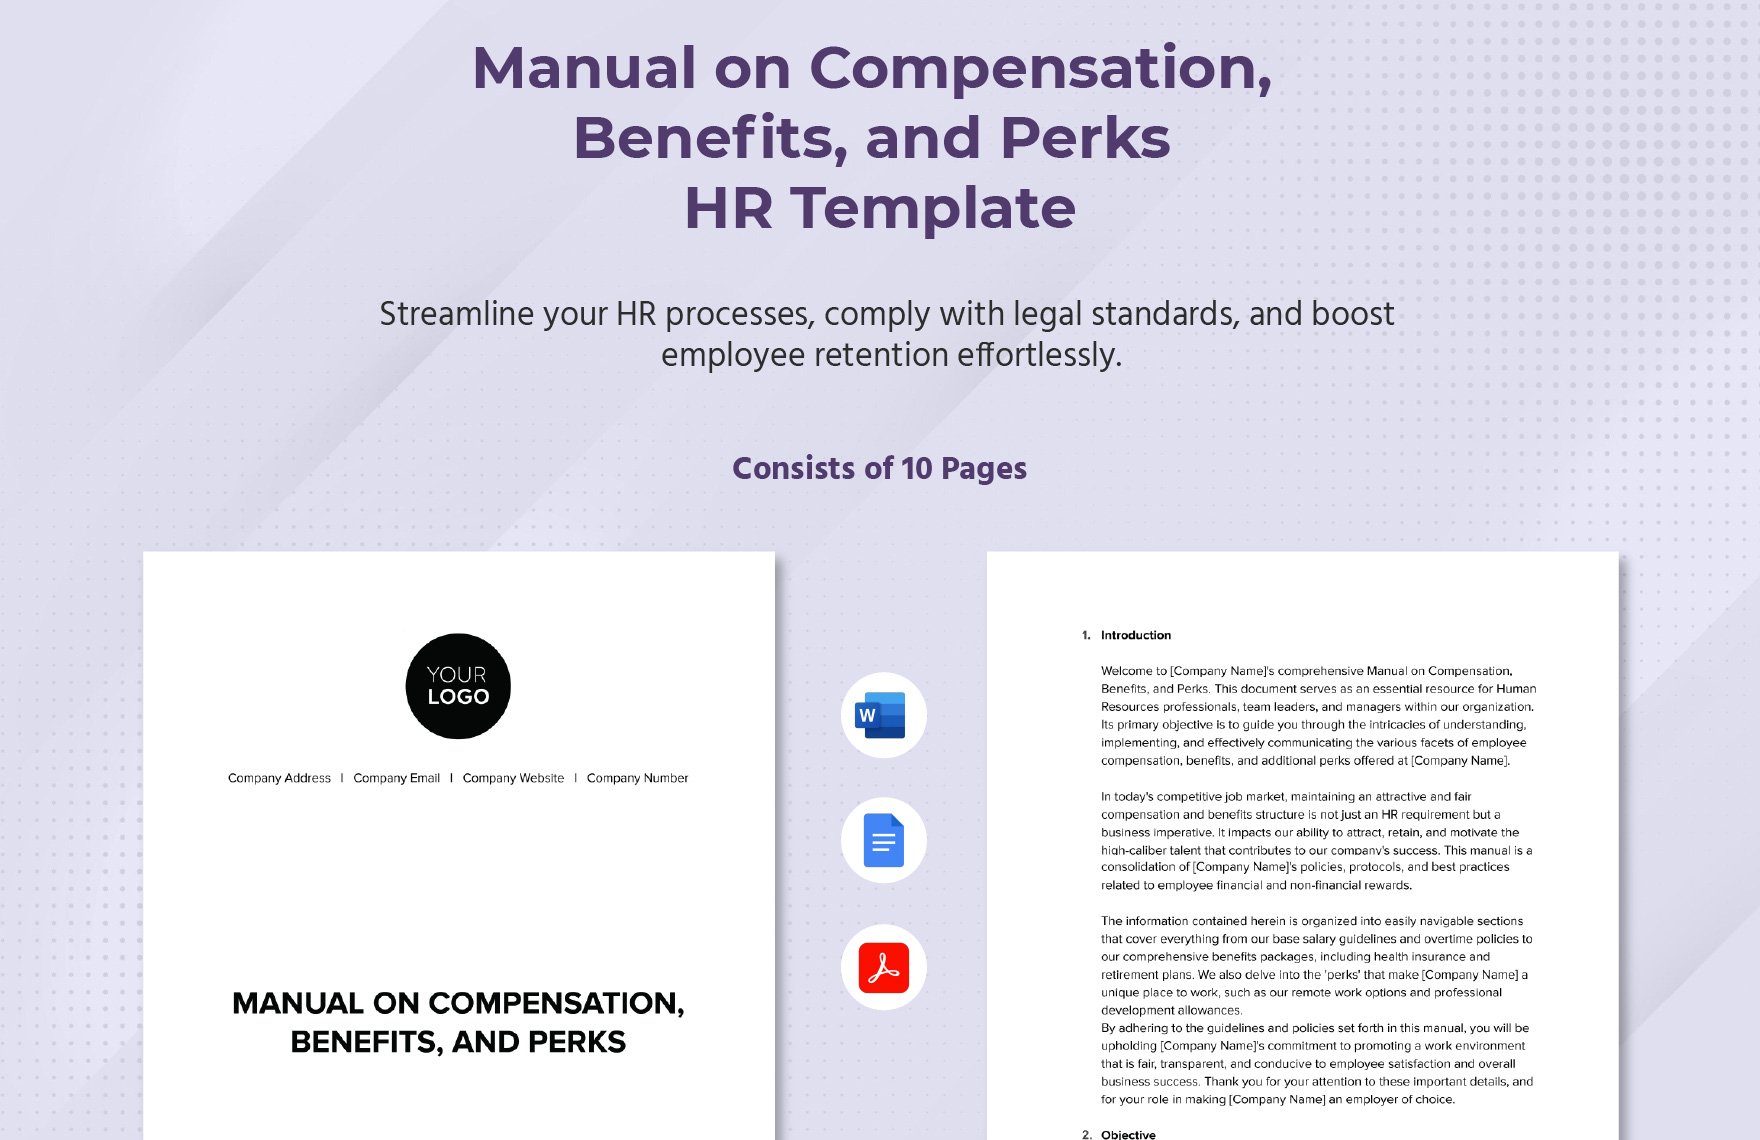 Manual on Compensation, Benefits, and Perks HR Template